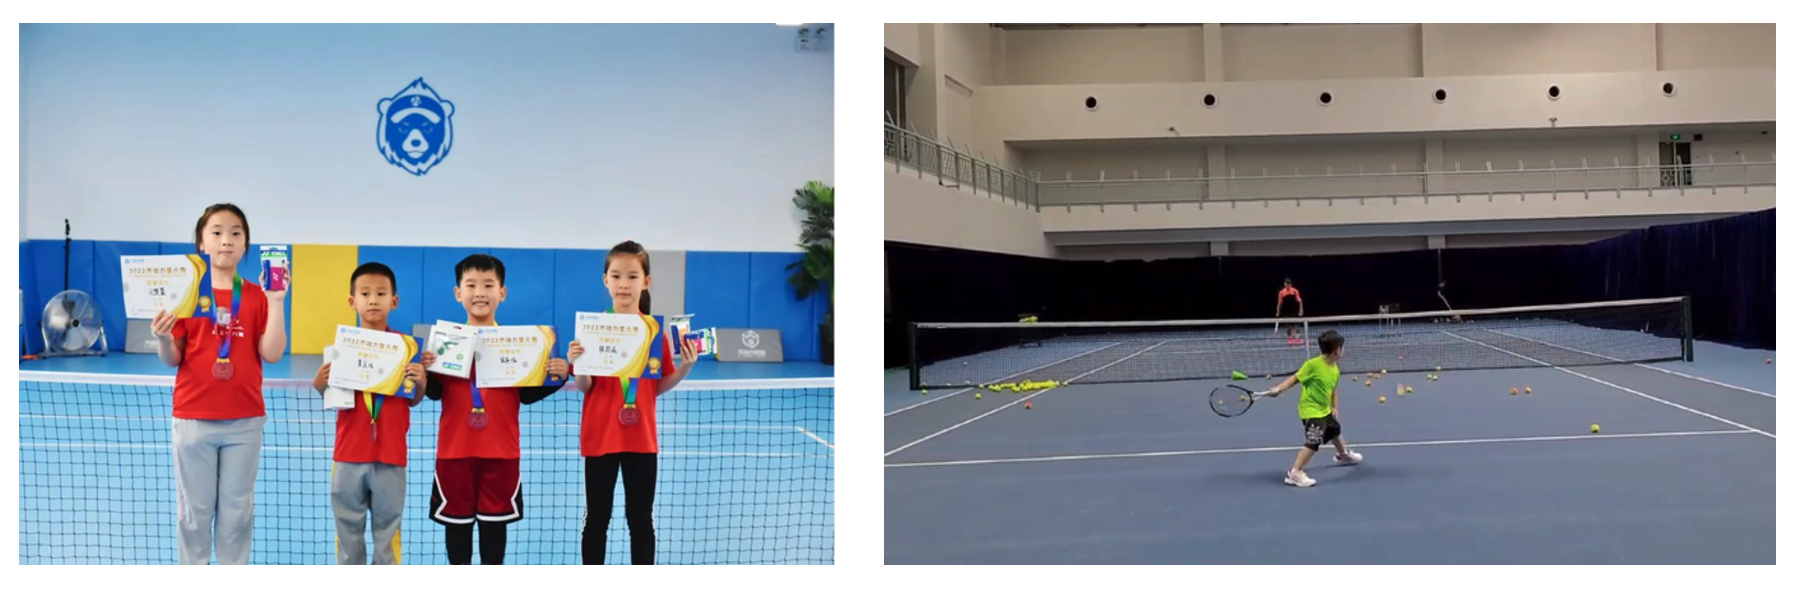 Tennis is increasingly becoming a popular sport for children's activities in China